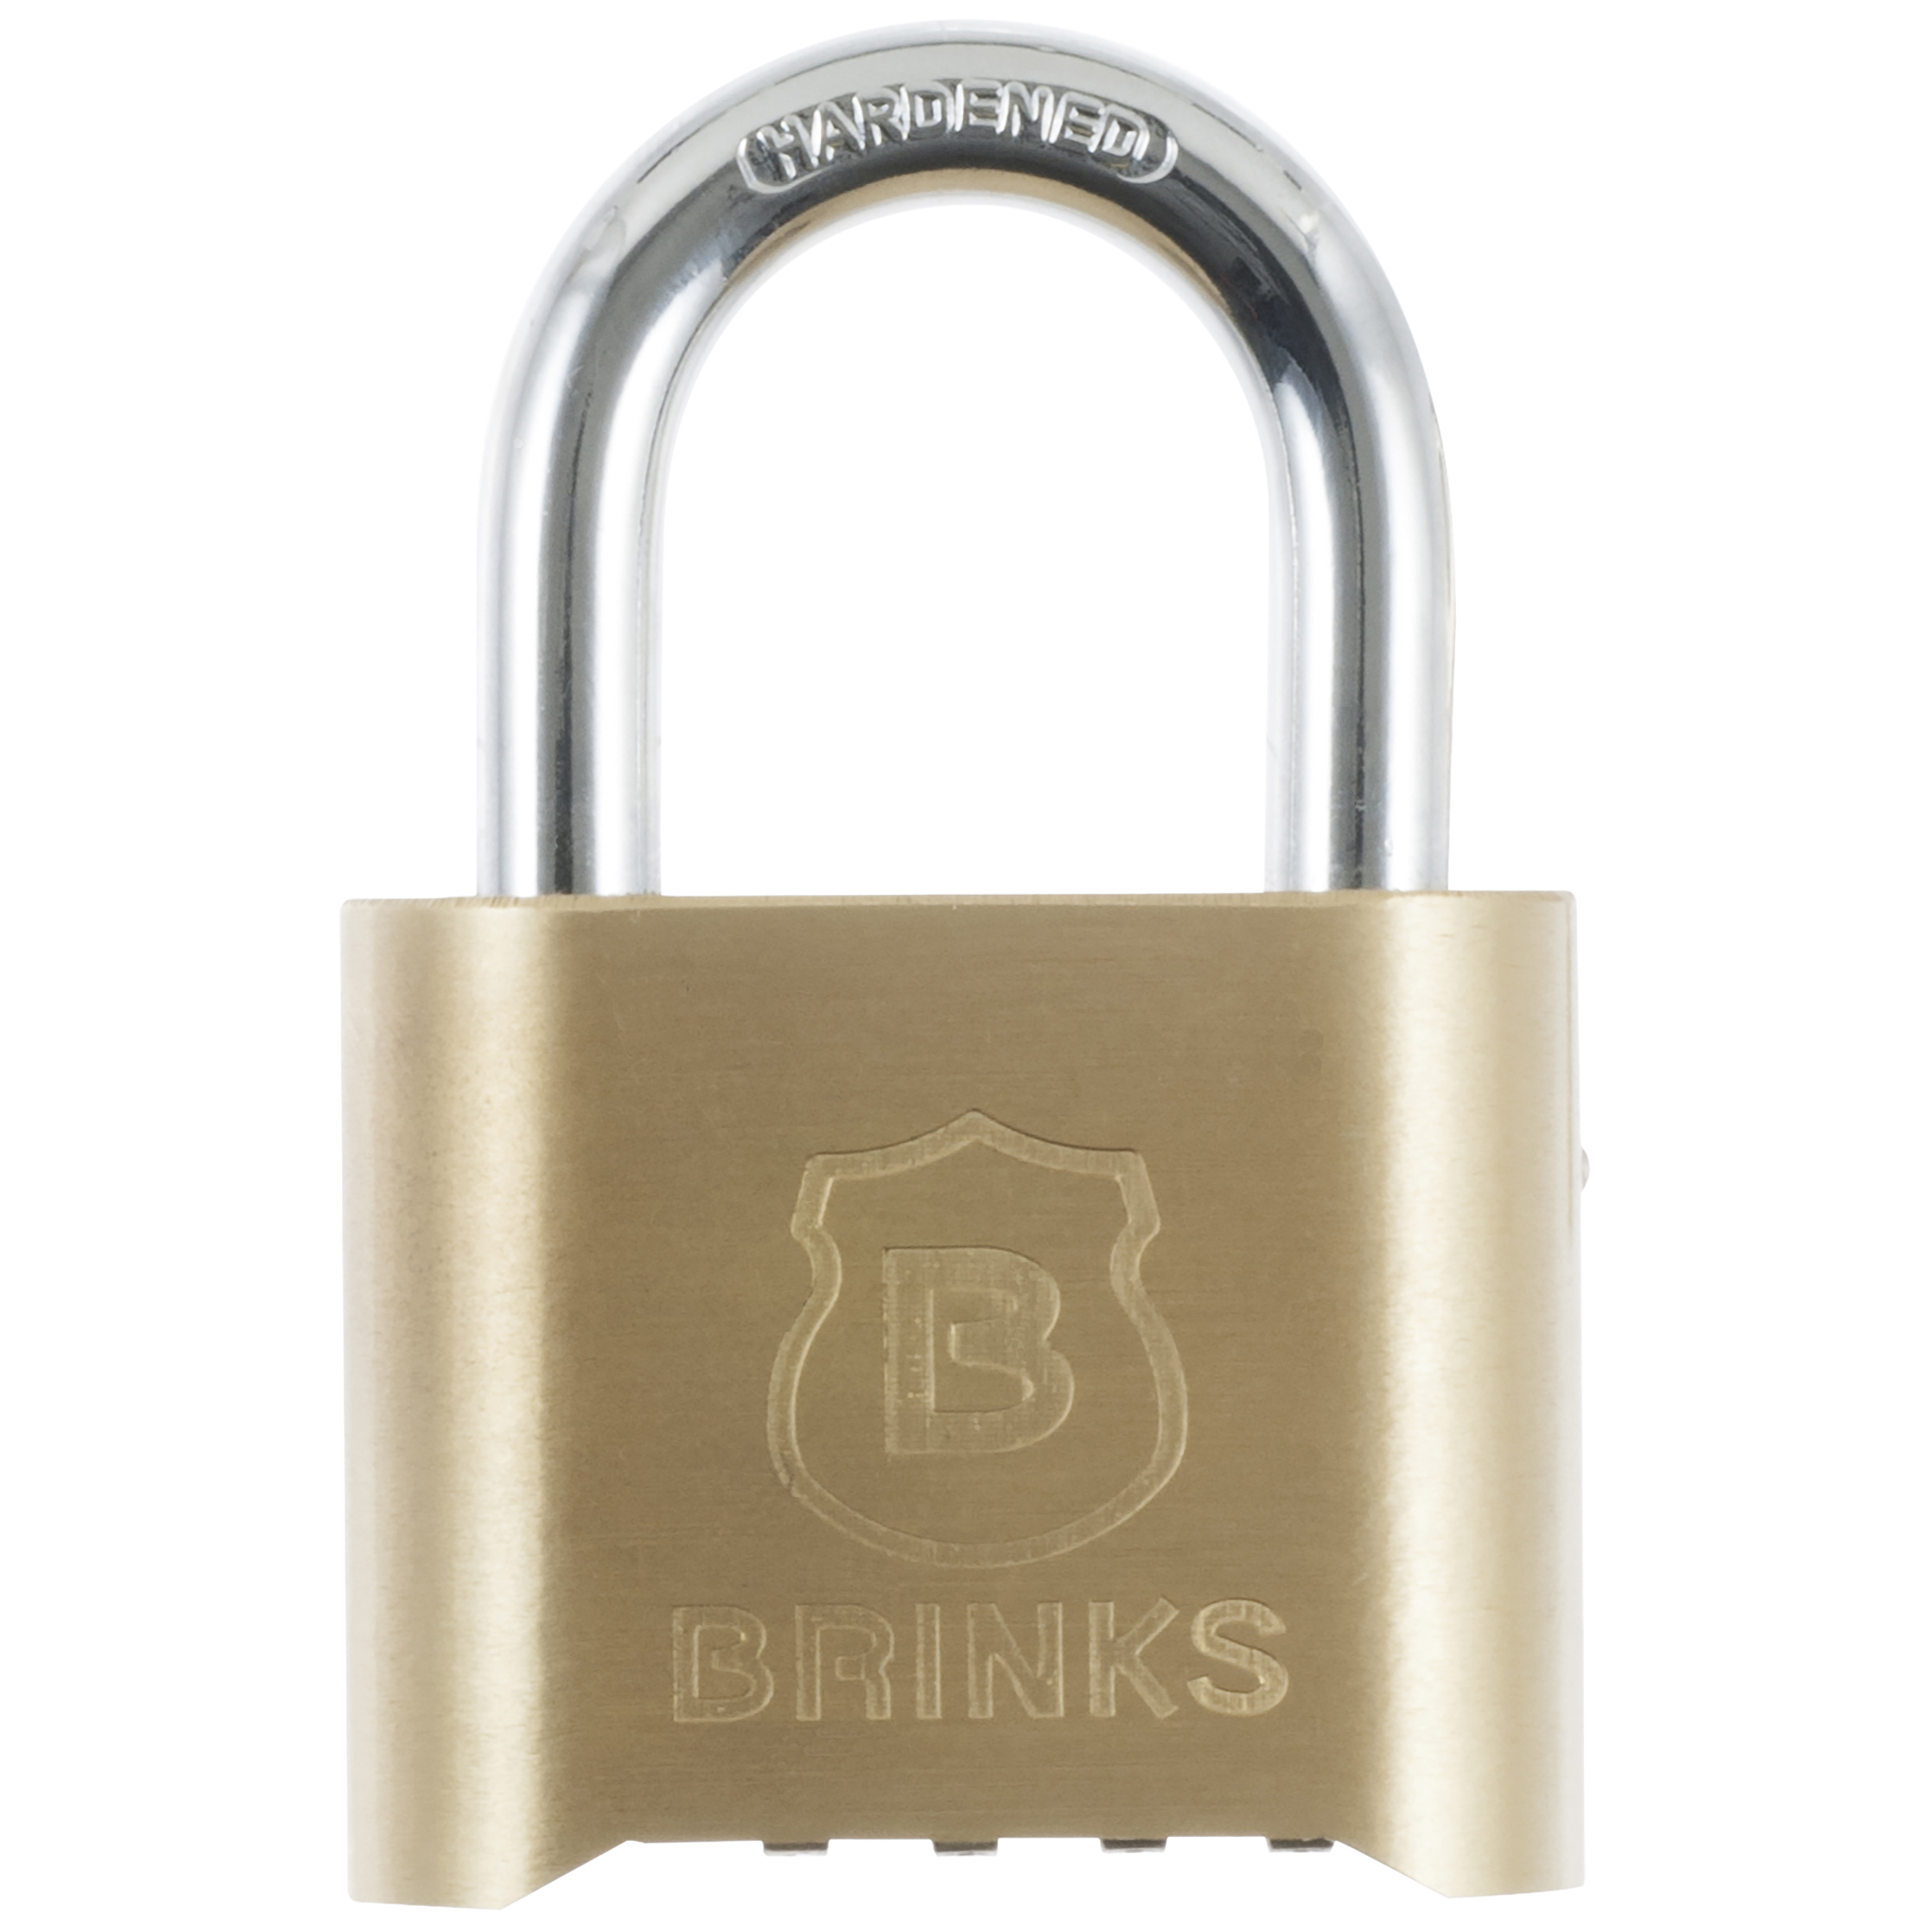 Brinks Solid Brass 50mm Resettable Combination Padlock with 1in Shackle - image 1 of 7